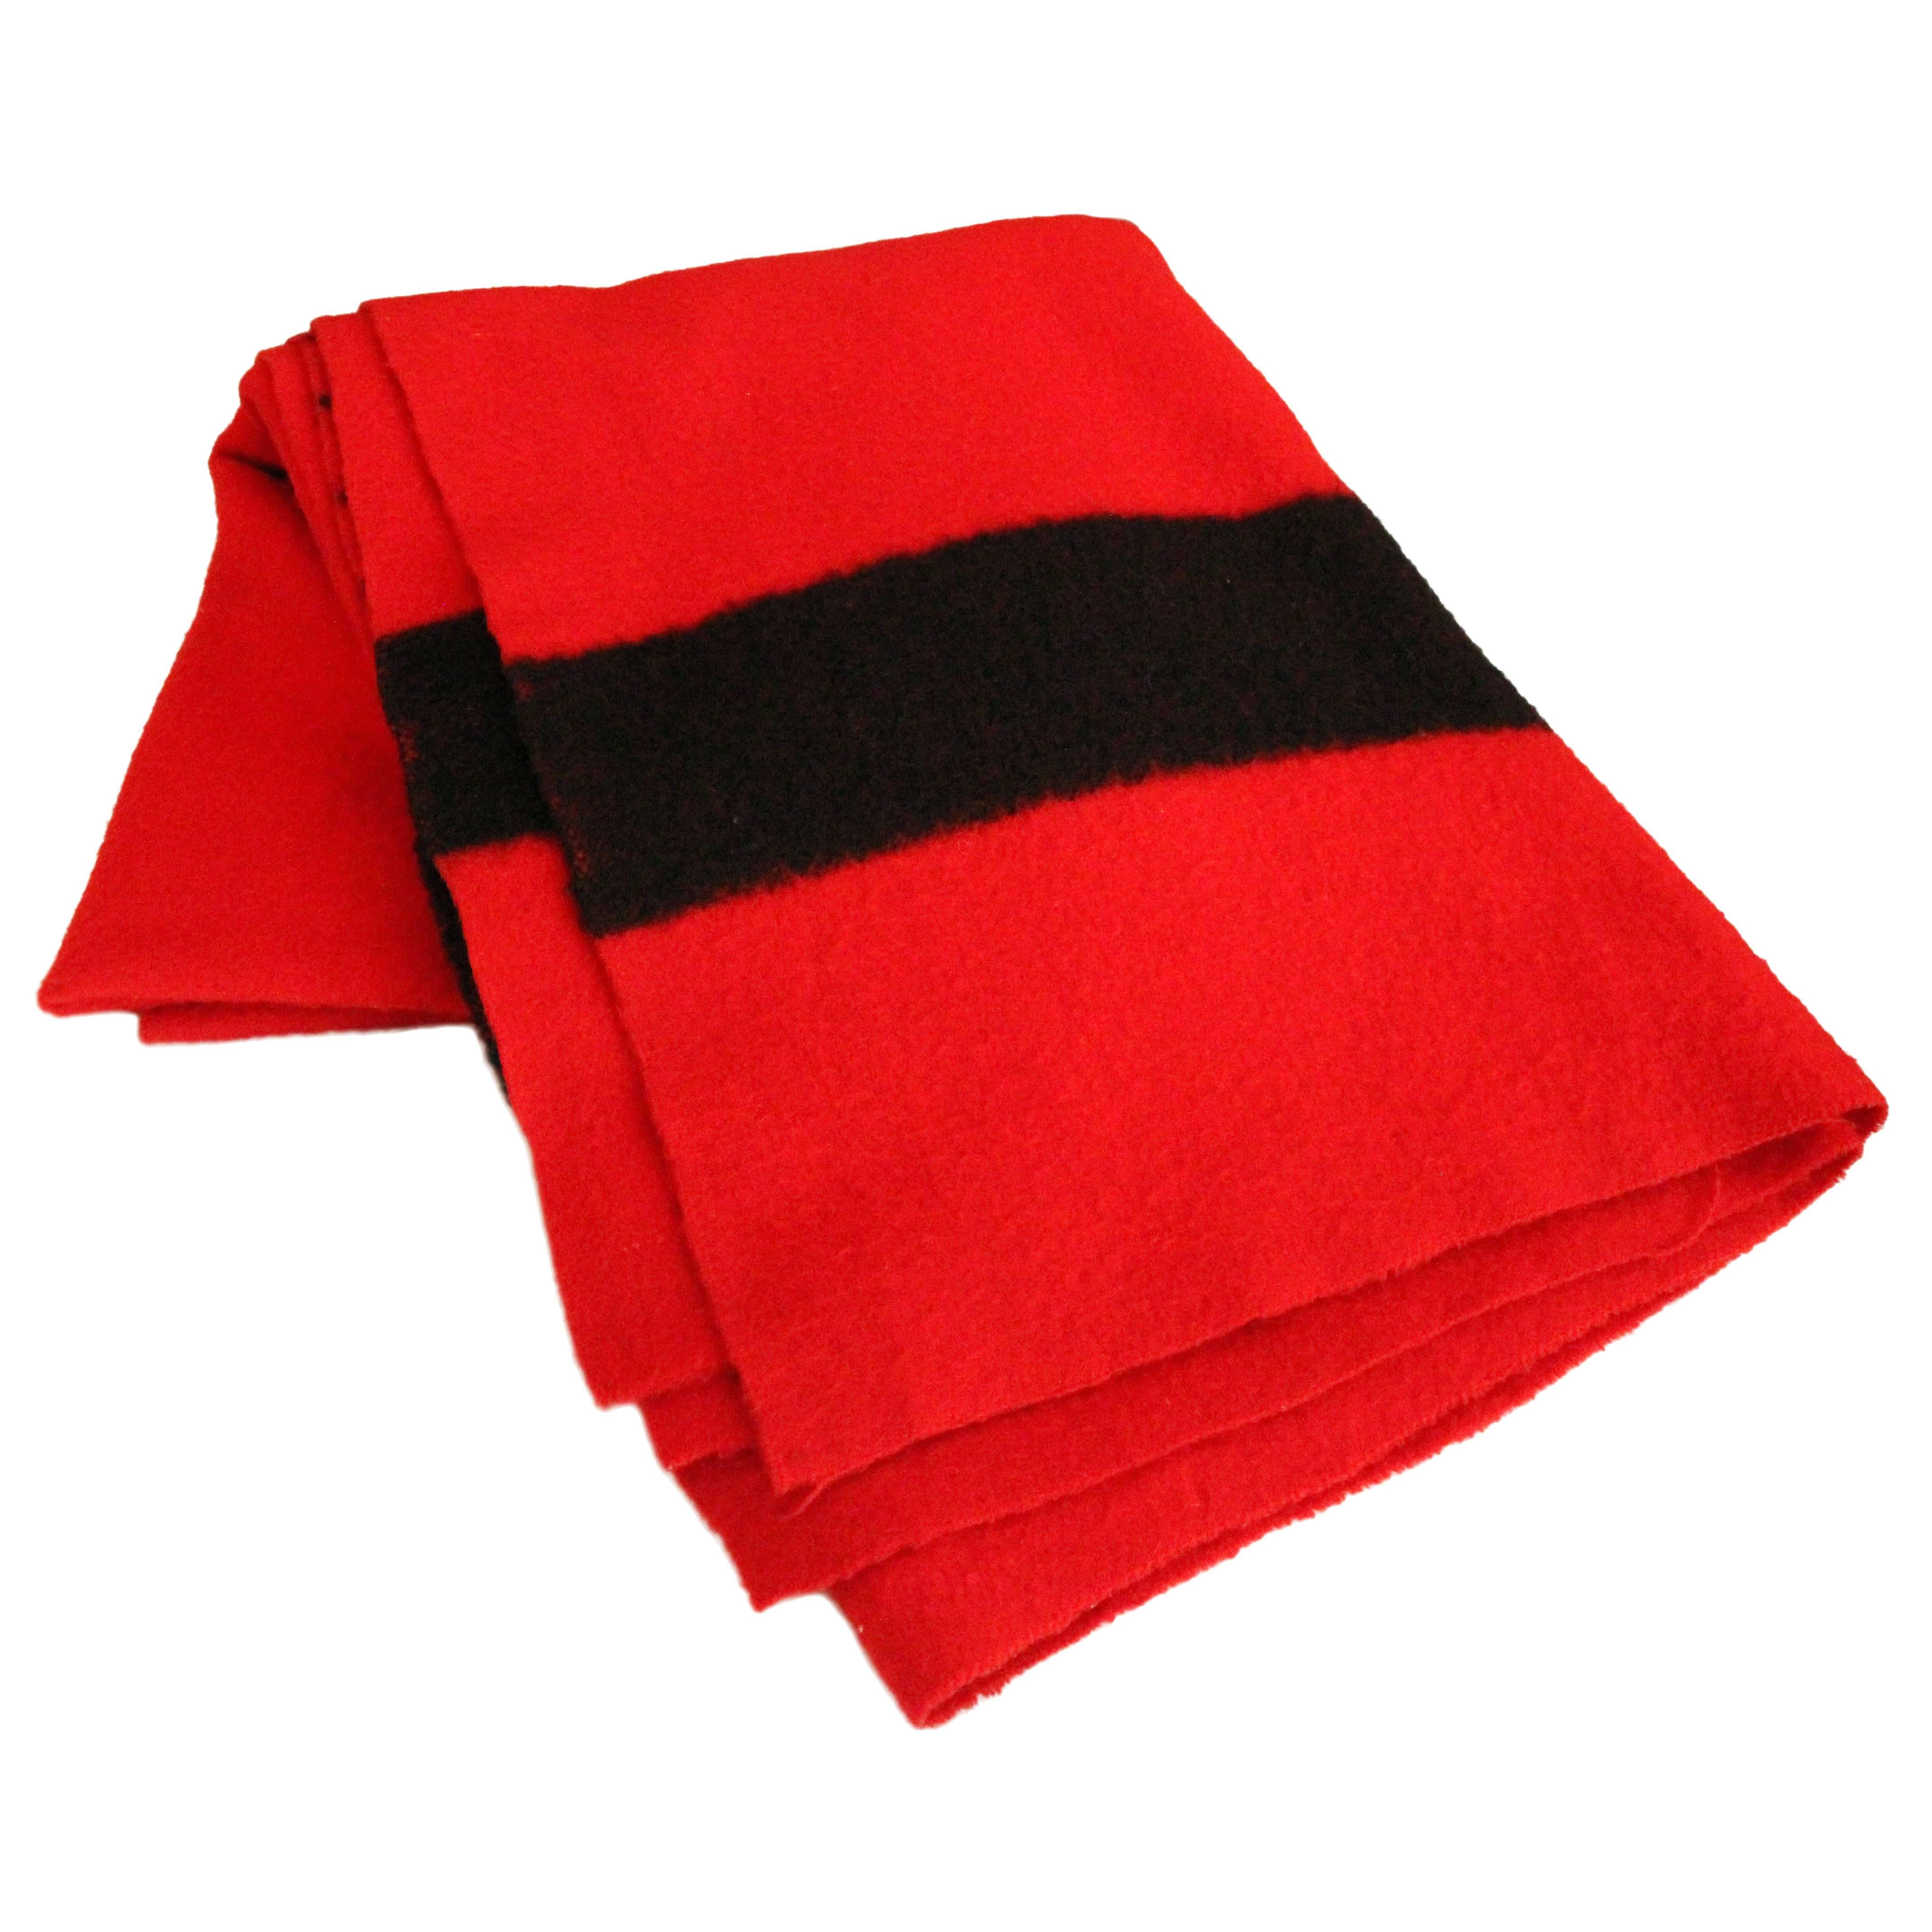 Hudson Bay Company Red Wool Blanket with Four Black Bands from England